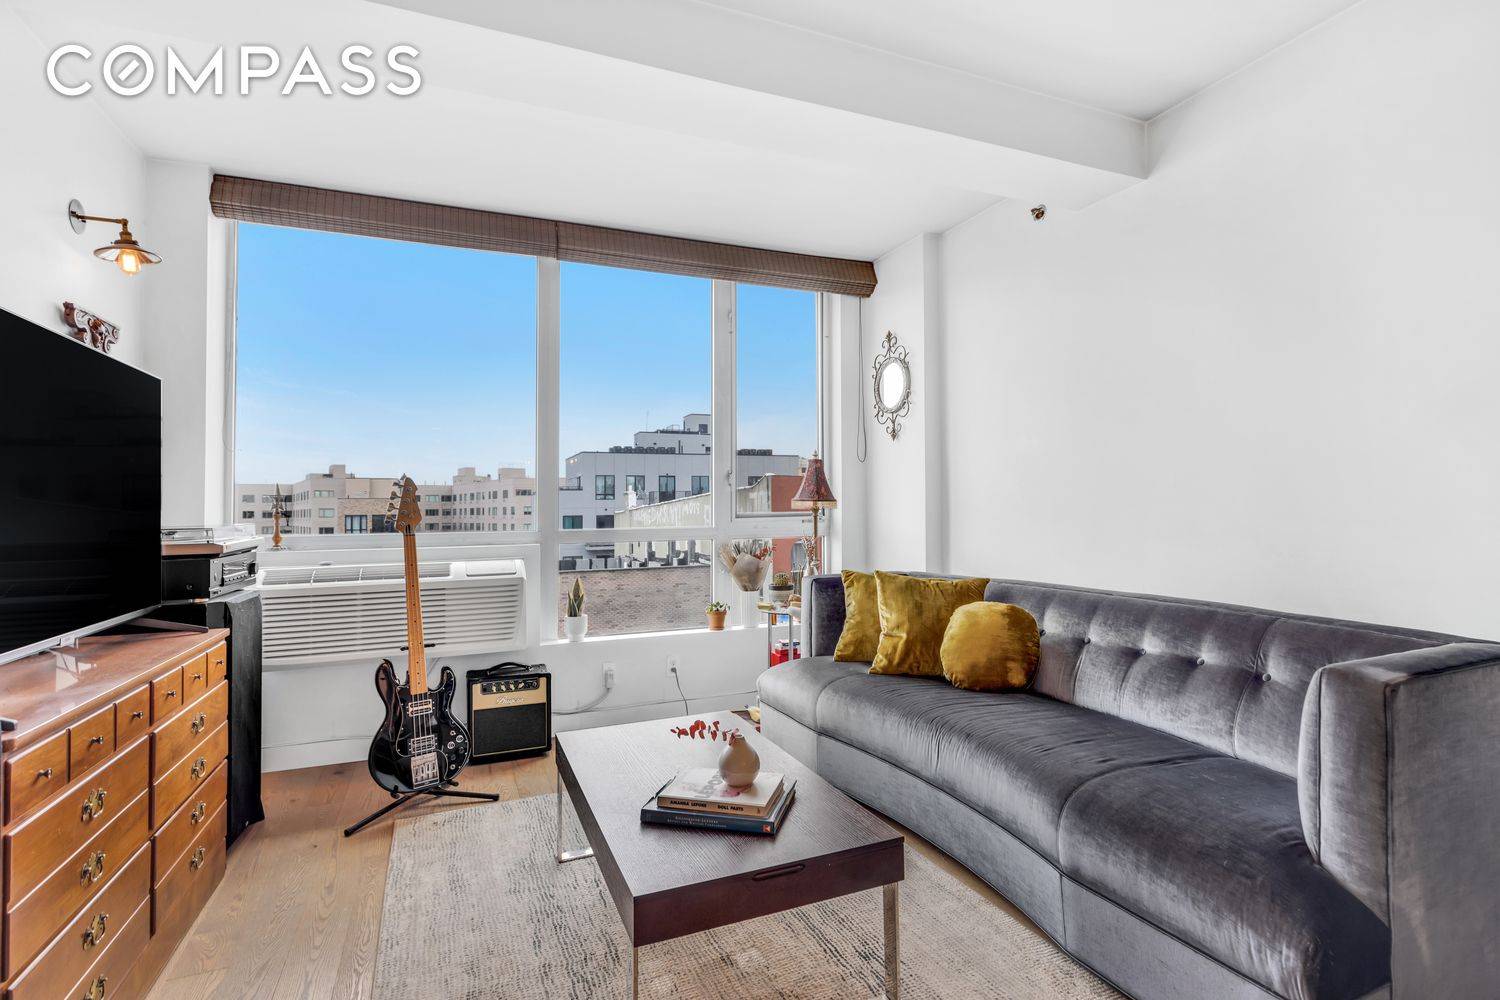 Immaculate and spacious 1BR condo, with sunny and bright, beautiful unobstructed blue sky views, on a quiet street, in the heart of Bushwick.